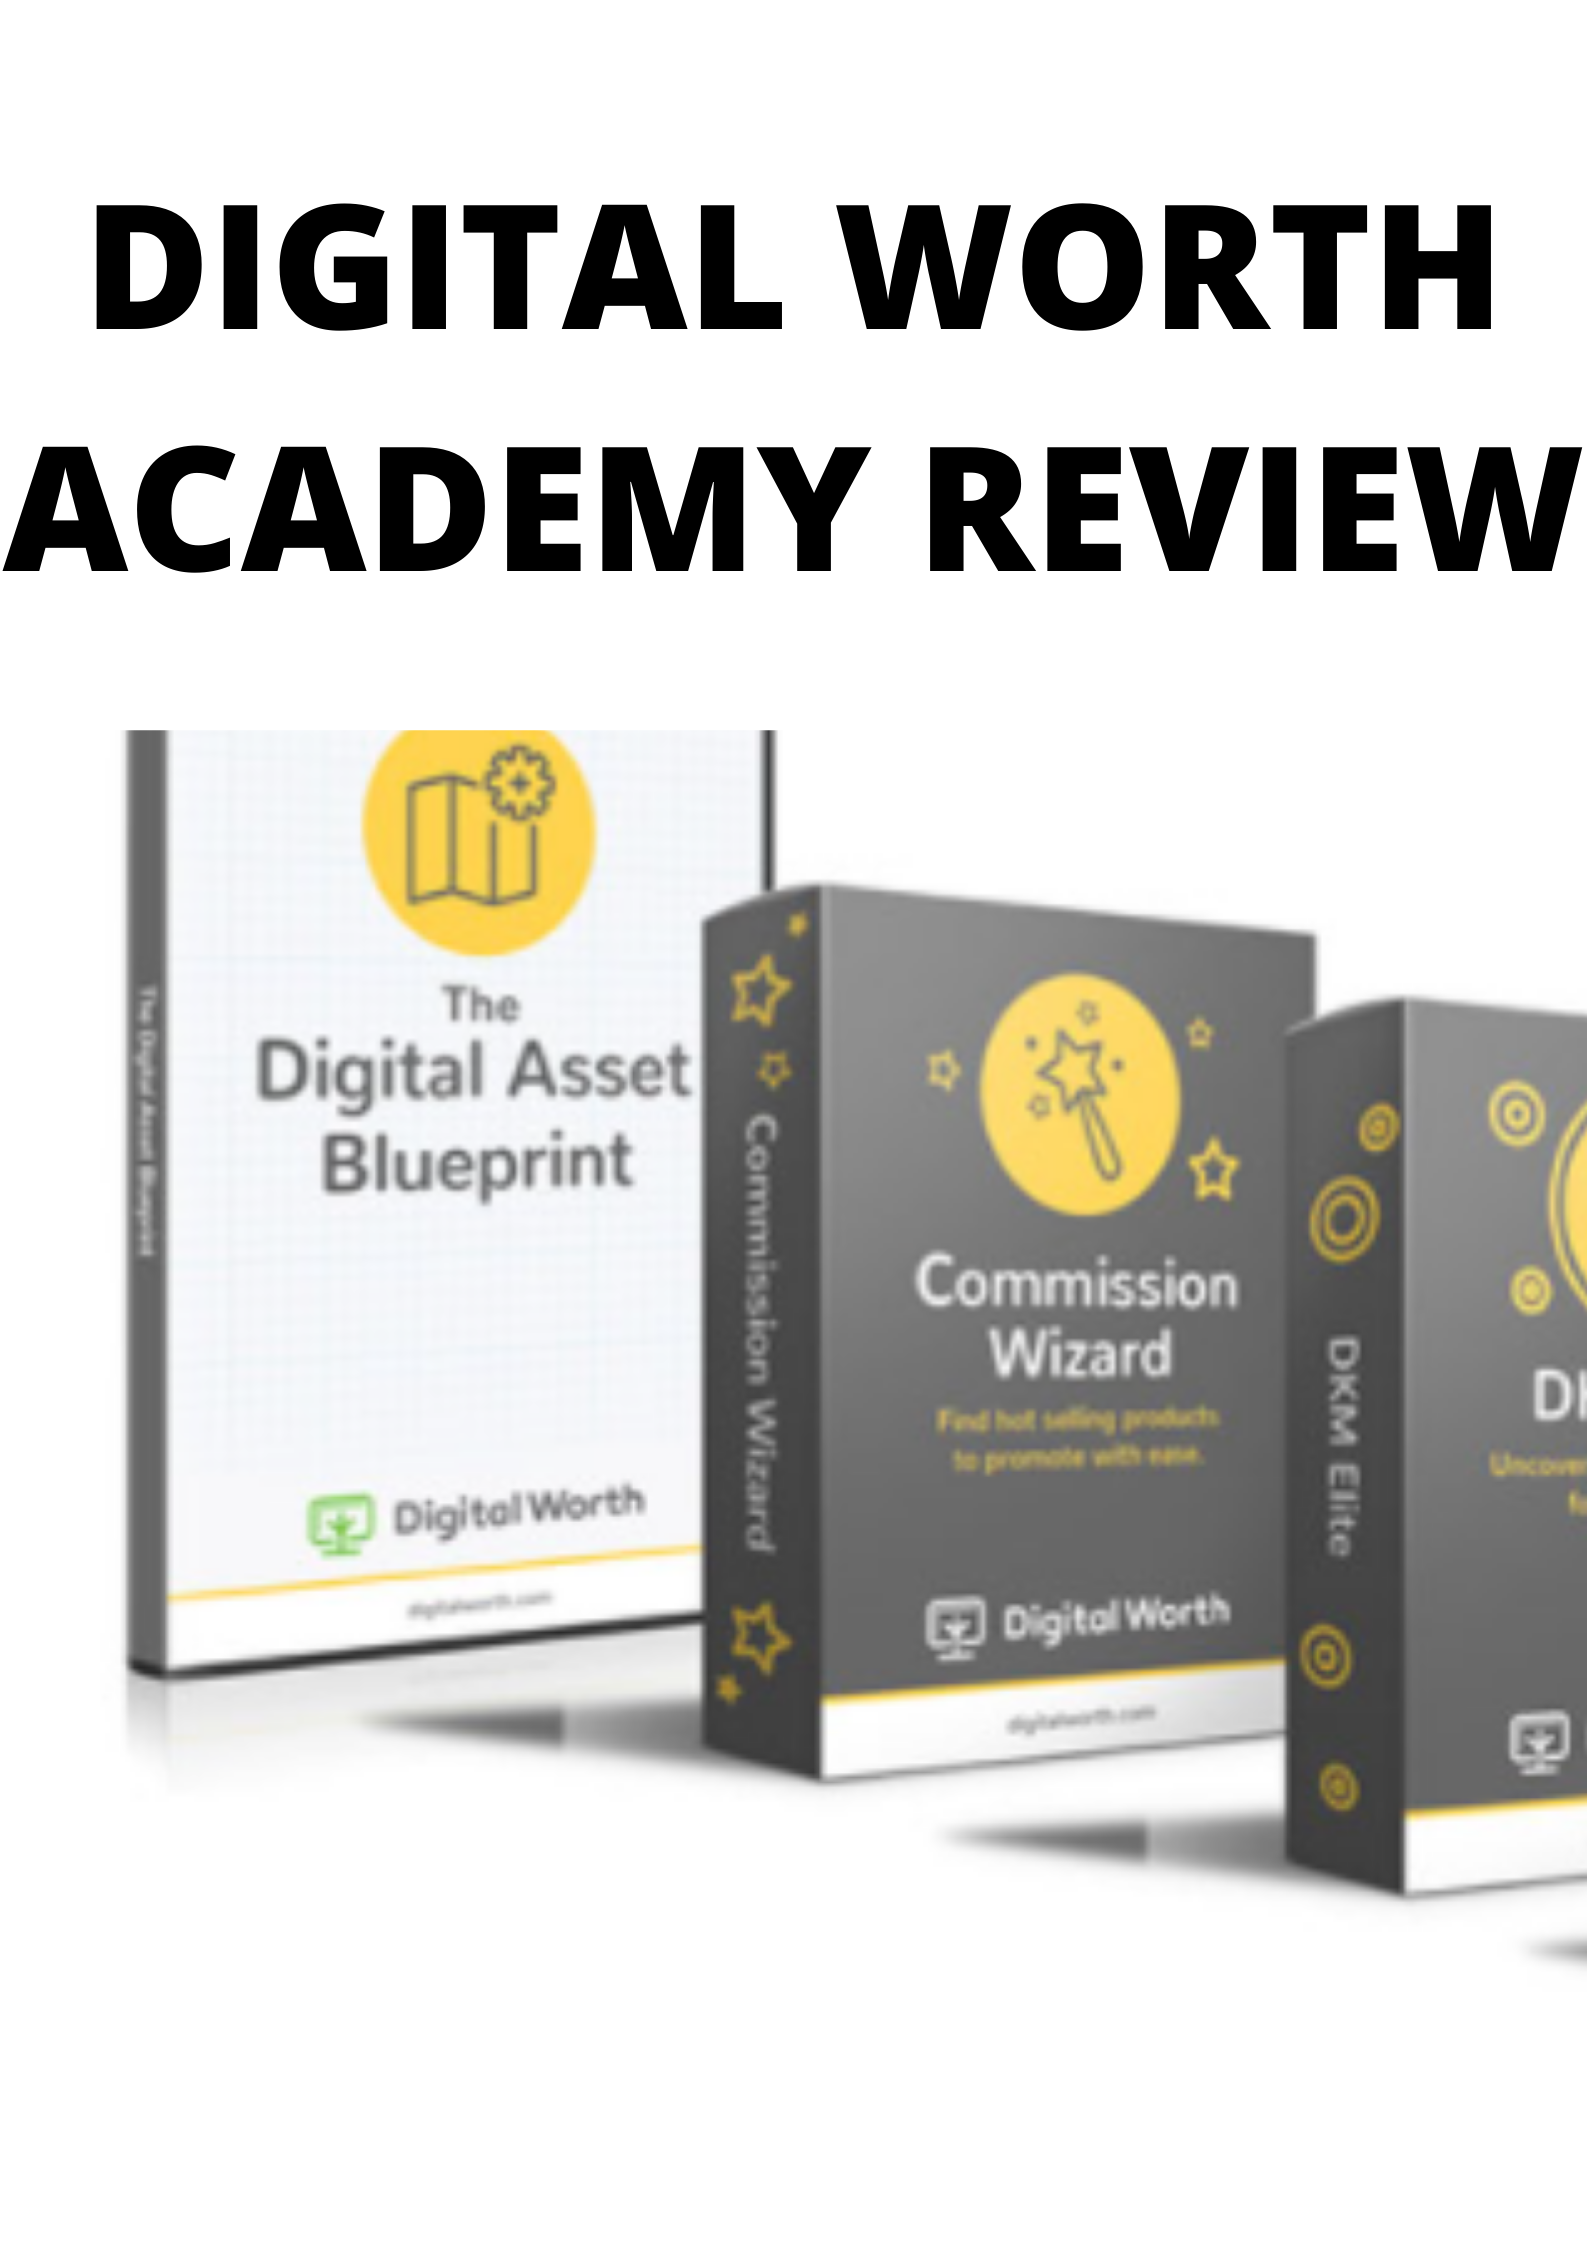 Digital Worth Academy Review